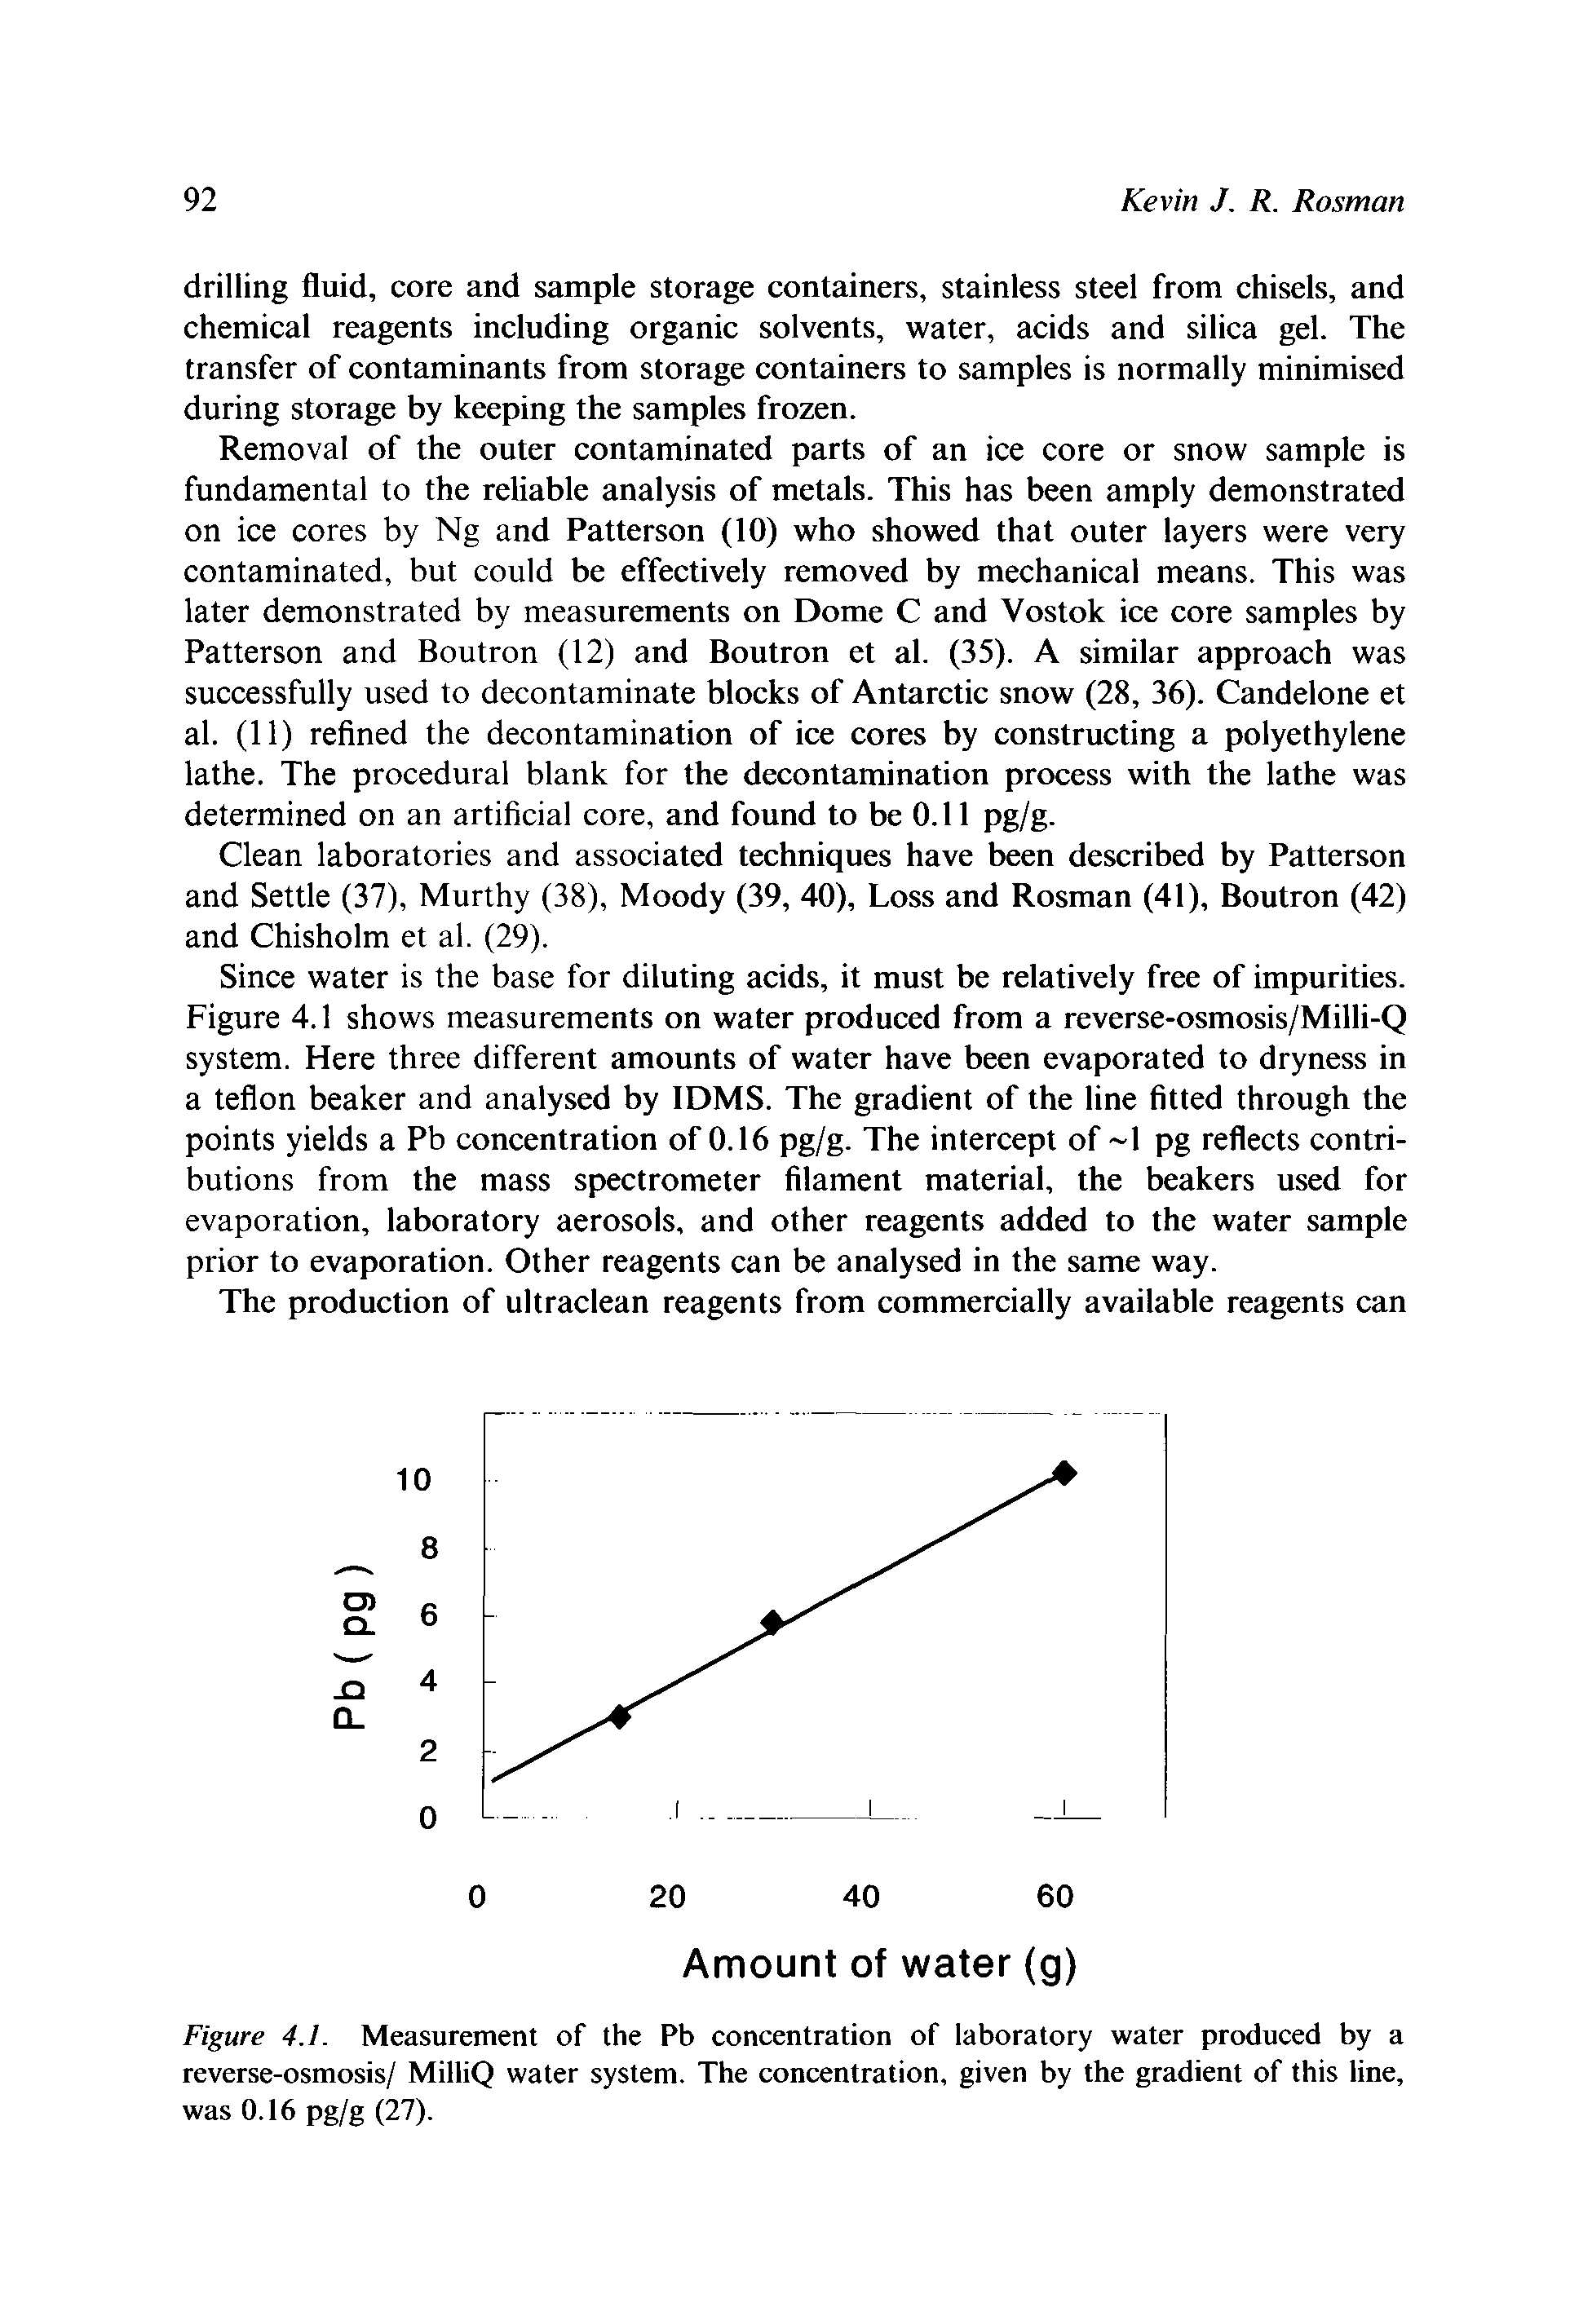 Figure 4.1. Measurement of the Pb concentration of laboratory water produced by a reverse-osmosis/ MilliQ water system. The concentration, given by the gradient of this line, was 0.16 pg/g (27).